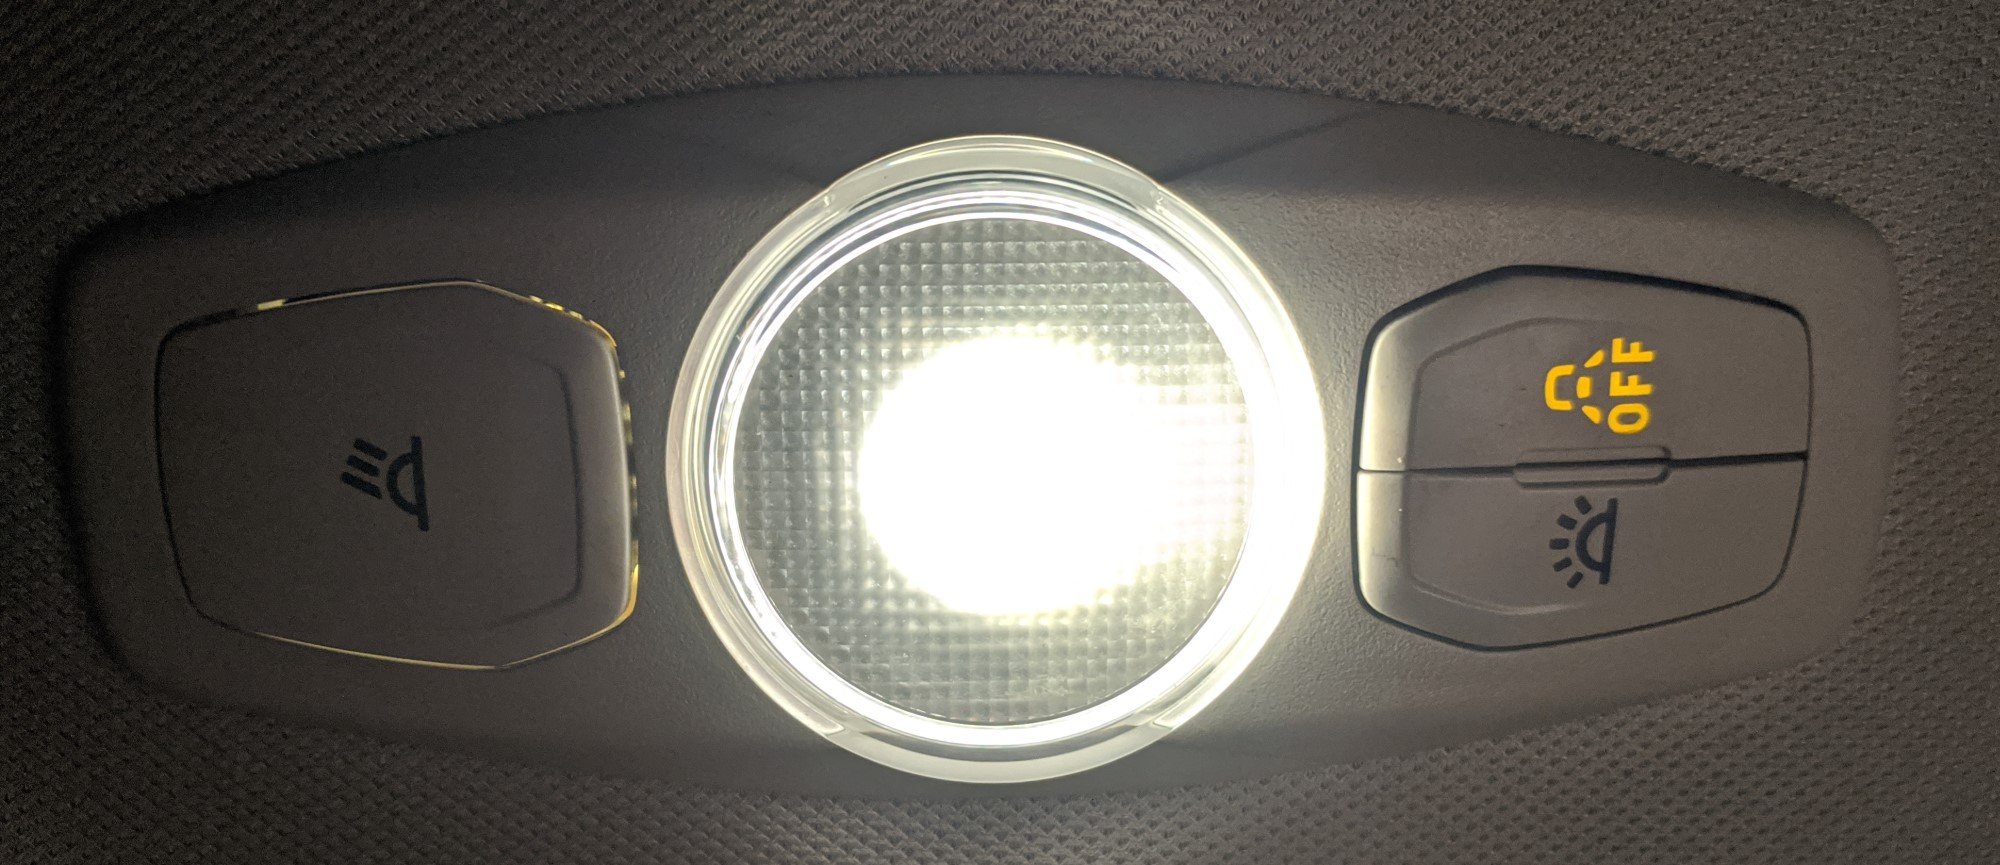 Turn On All Interior Lights 2017 Accessorieodifications Ford Transit Connect Forum